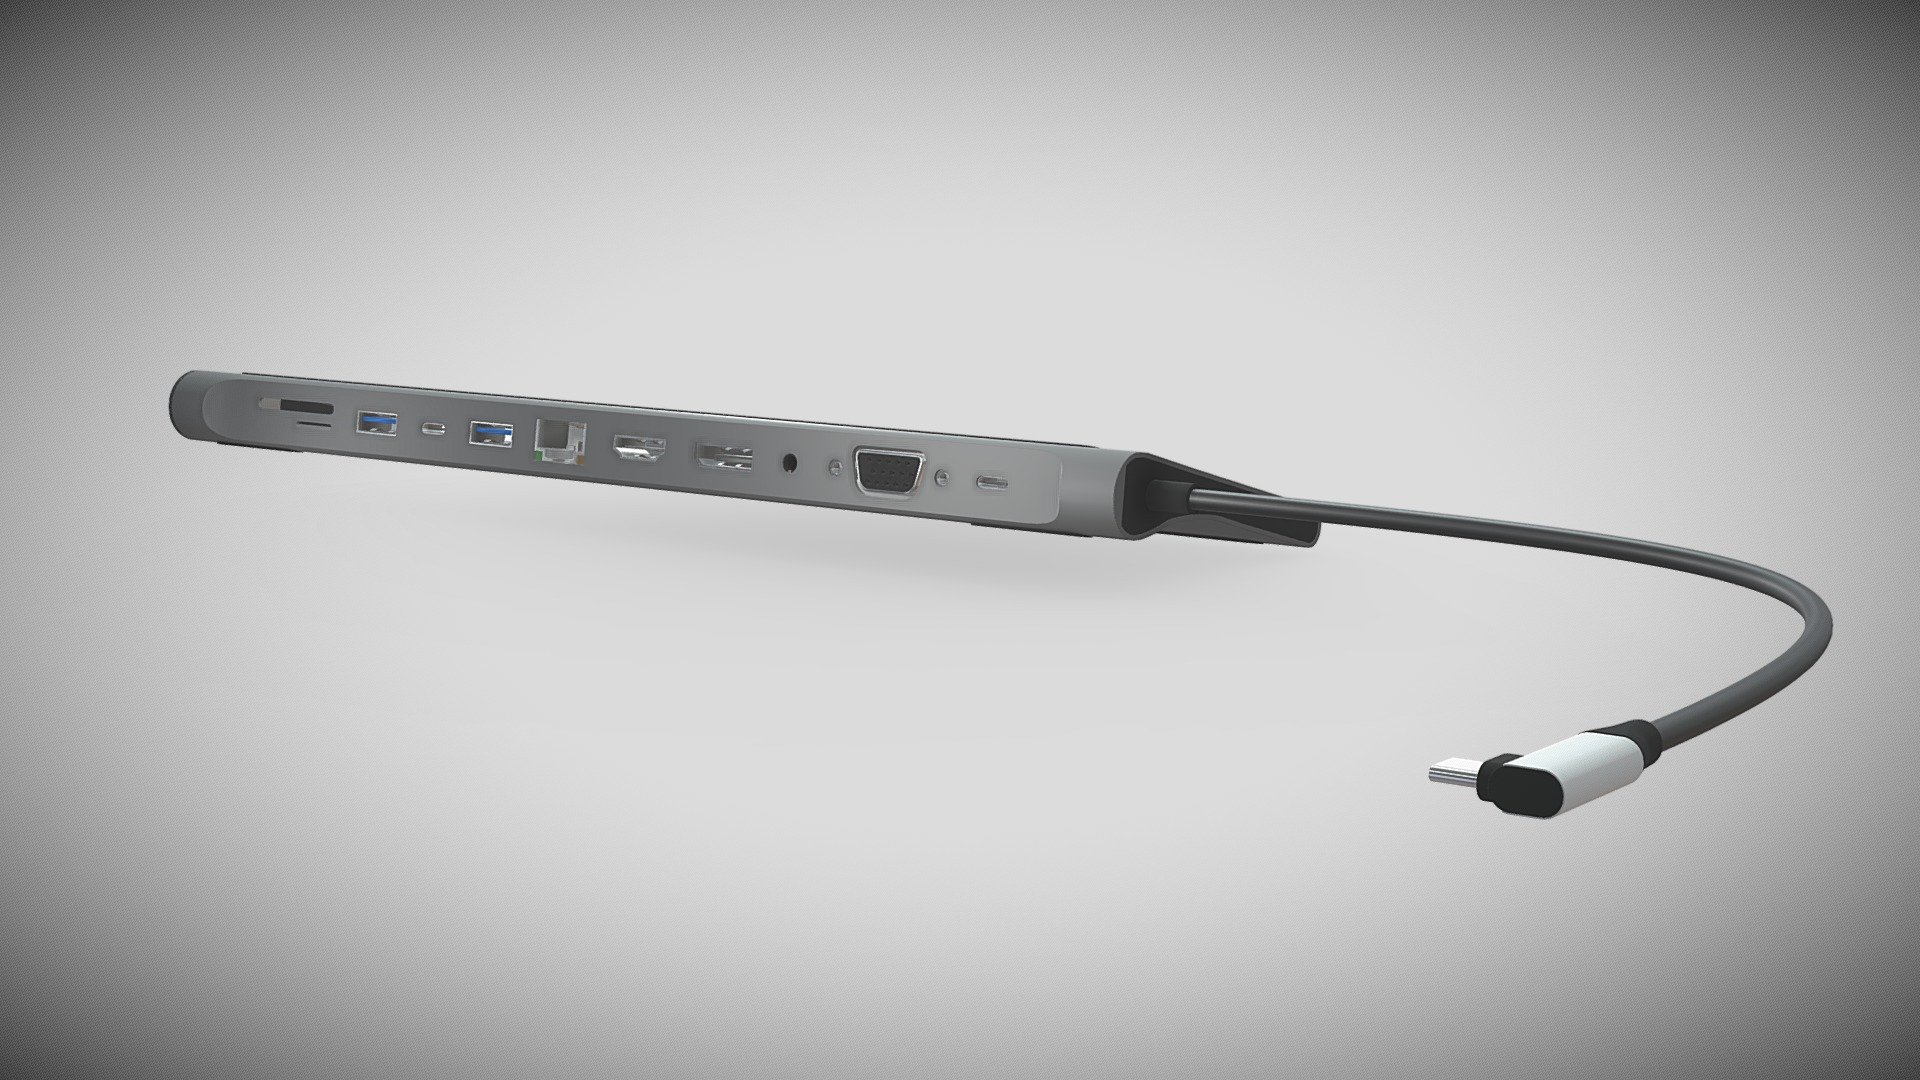 Usb type-c Multi-port adapter hub, modeled in scale 1:1 after a real product in Blender.
Ports for connection are the following:
3x USB type A (classic USB 3.0)
2x USB type C
1x HDMI
1x Ethernet
1x 3.5mm Aux
1x VGA
1x Display Port

For further information, don't esitate to comment and ask 3d model